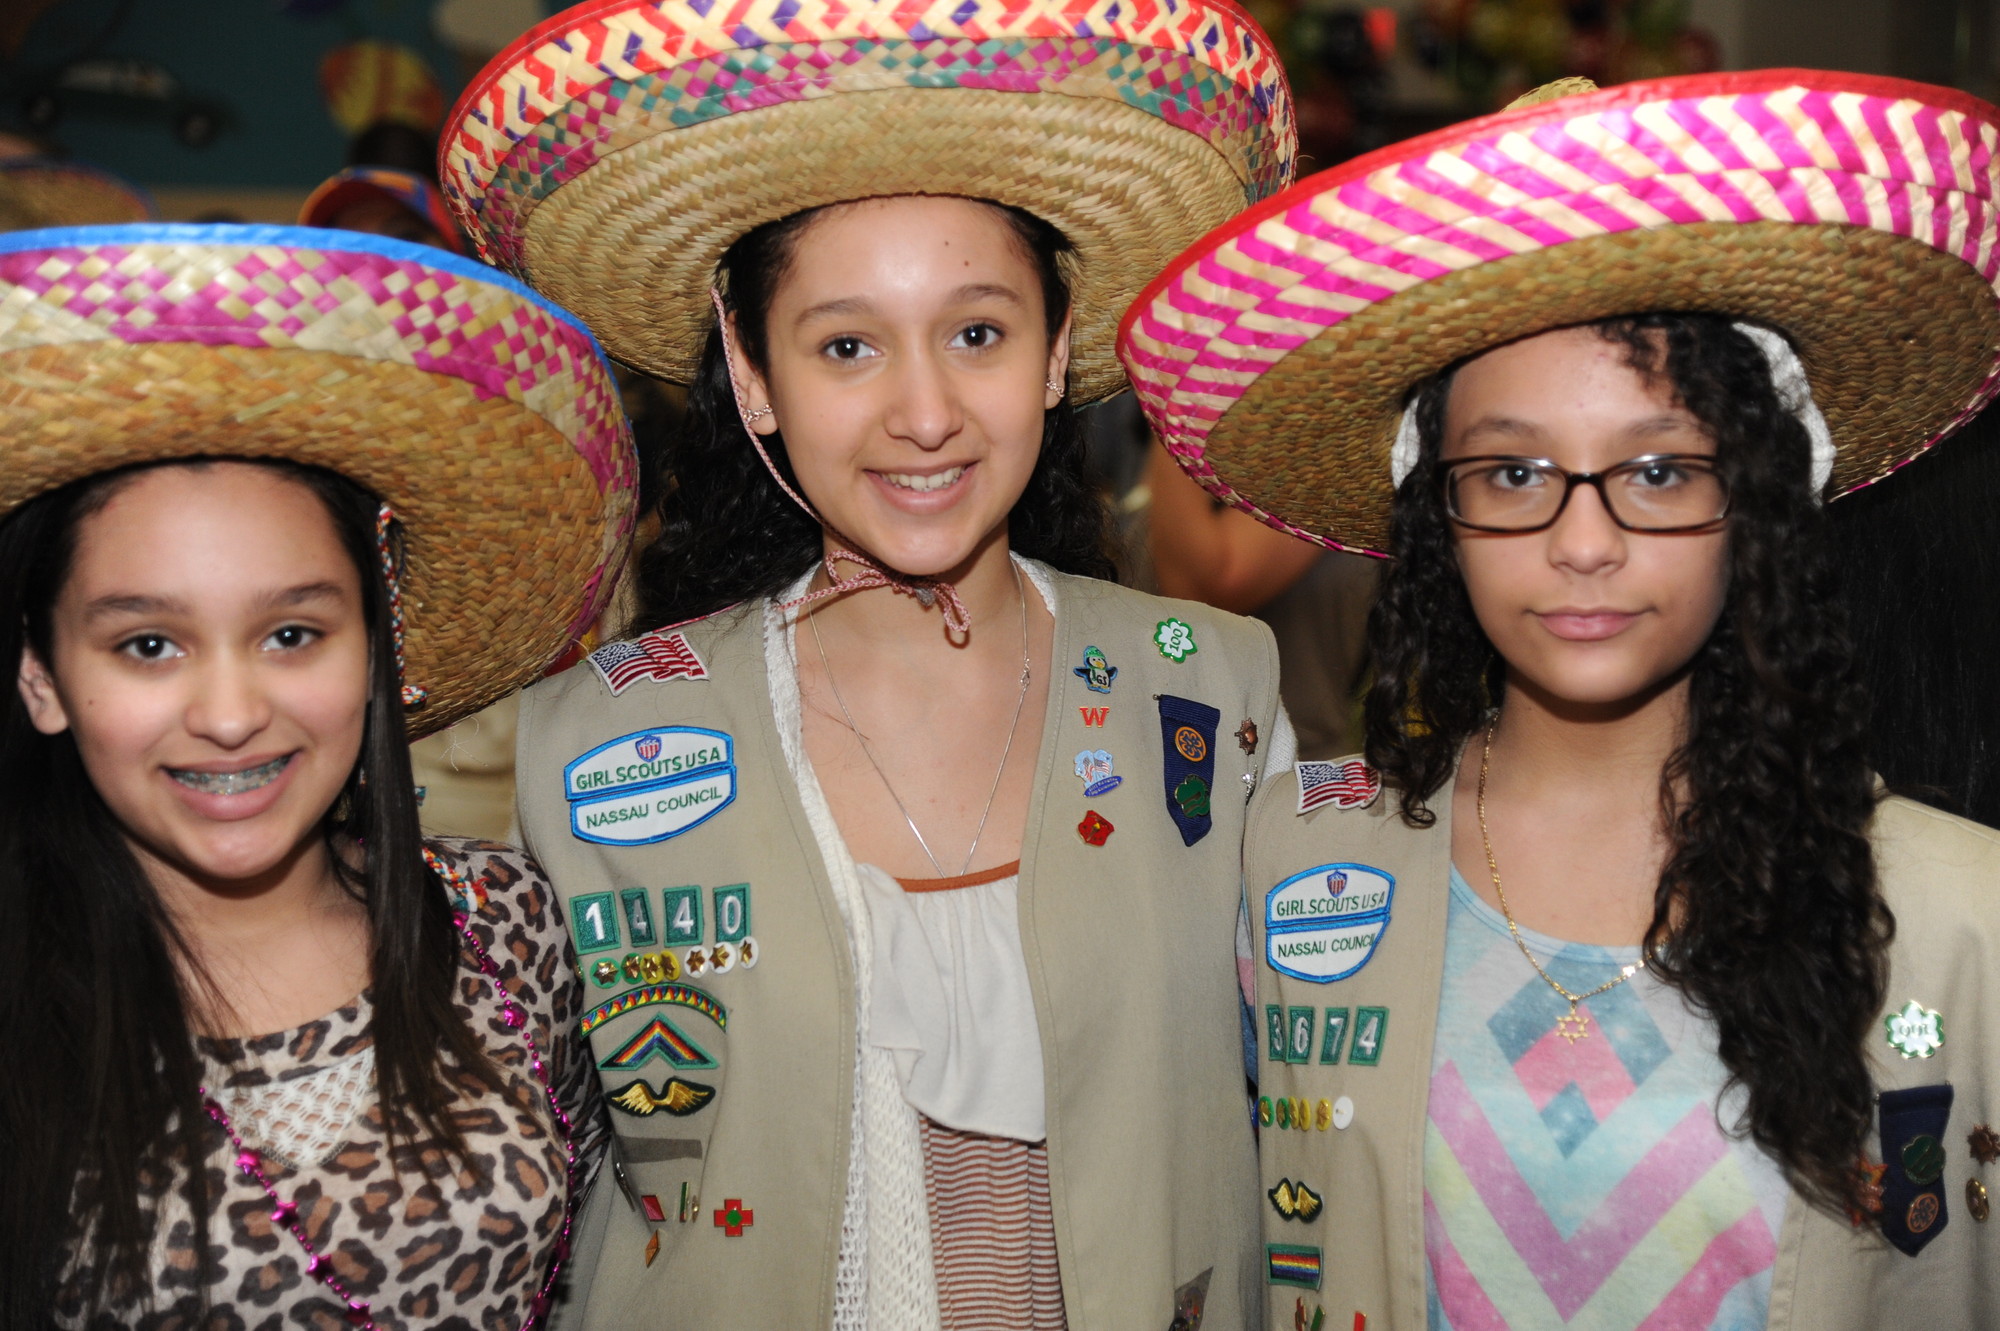 Melina Ramirez, 15, middle, with sisters Sofie, 13, left, and Gillian, 12, showed pride in their Latin roots.